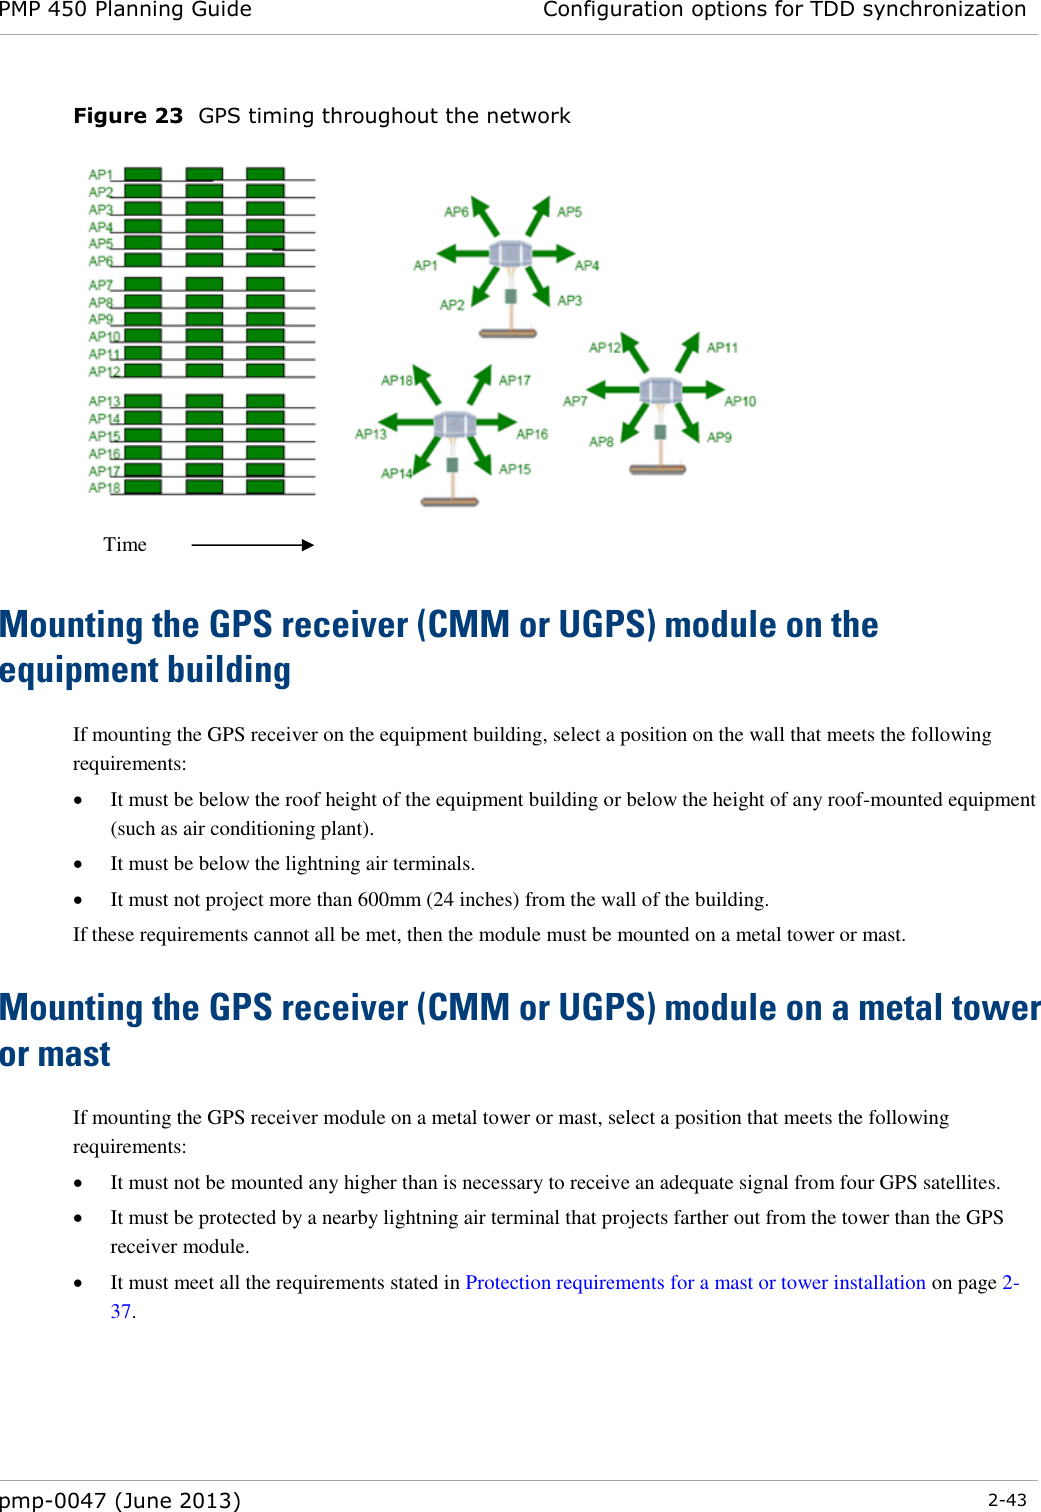 PMP 450 Planning Guide Configuration options for TDD synchronization  pmp-0047 (June 2013)  2-43  Figure 23  GPS timing throughout the network   Mounting the GPS receiver (CMM or UGPS) module on the equipment building If mounting the GPS receiver on the equipment building, select a position on the wall that meets the following requirements:  It must be below the roof height of the equipment building or below the height of any roof-mounted equipment (such as air conditioning plant).  It must be below the lightning air terminals.  It must not project more than 600mm (24 inches) from the wall of the building. If these requirements cannot all be met, then the module must be mounted on a metal tower or mast. Mounting the GPS receiver (CMM or UGPS) module on a metal tower or mast If mounting the GPS receiver module on a metal tower or mast, select a position that meets the following requirements:  It must not be mounted any higher than is necessary to receive an adequate signal from four GPS satellites.  It must be protected by a nearby lightning air terminal that projects farther out from the tower than the GPS receiver module.  It must meet all the requirements stated in Protection requirements for a mast or tower installation on page 2-37.  Time 